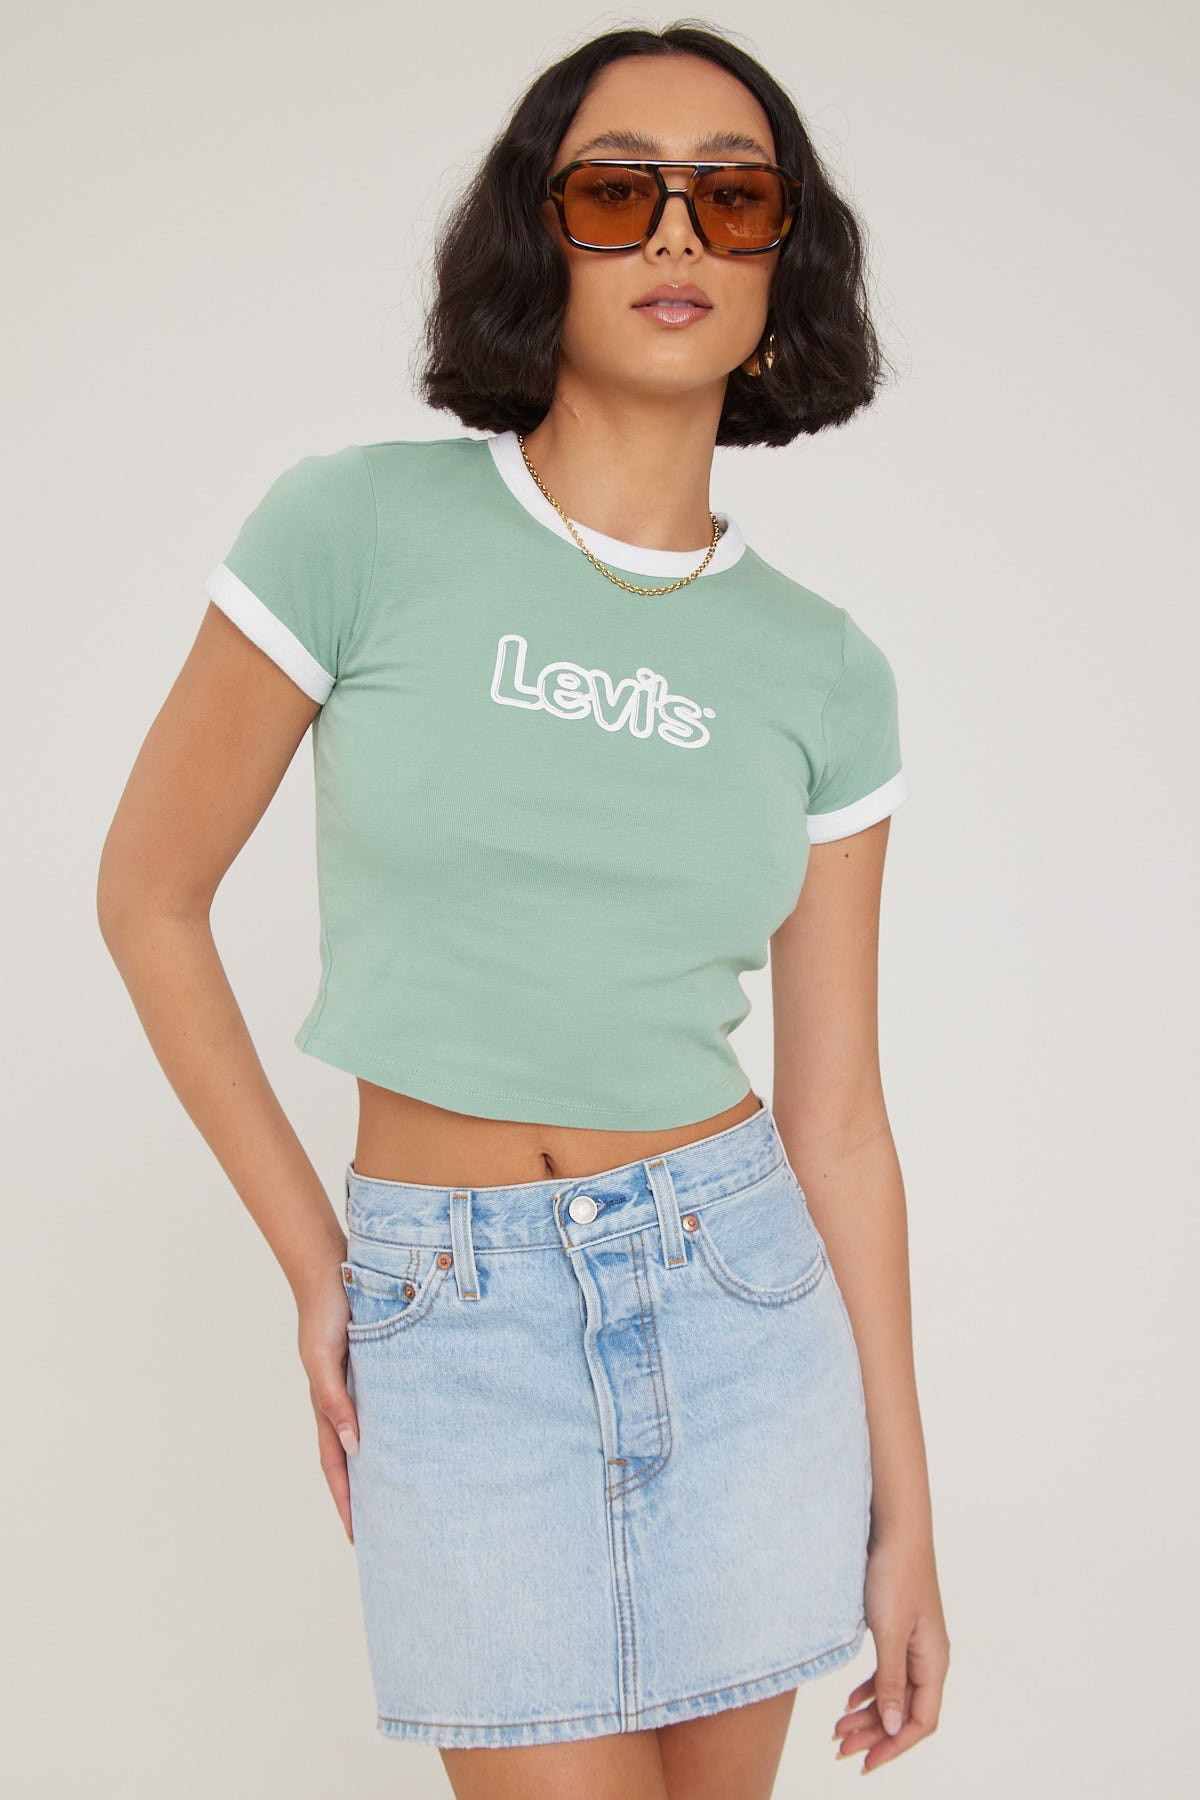 Levi's Icon Skirt Front and Center